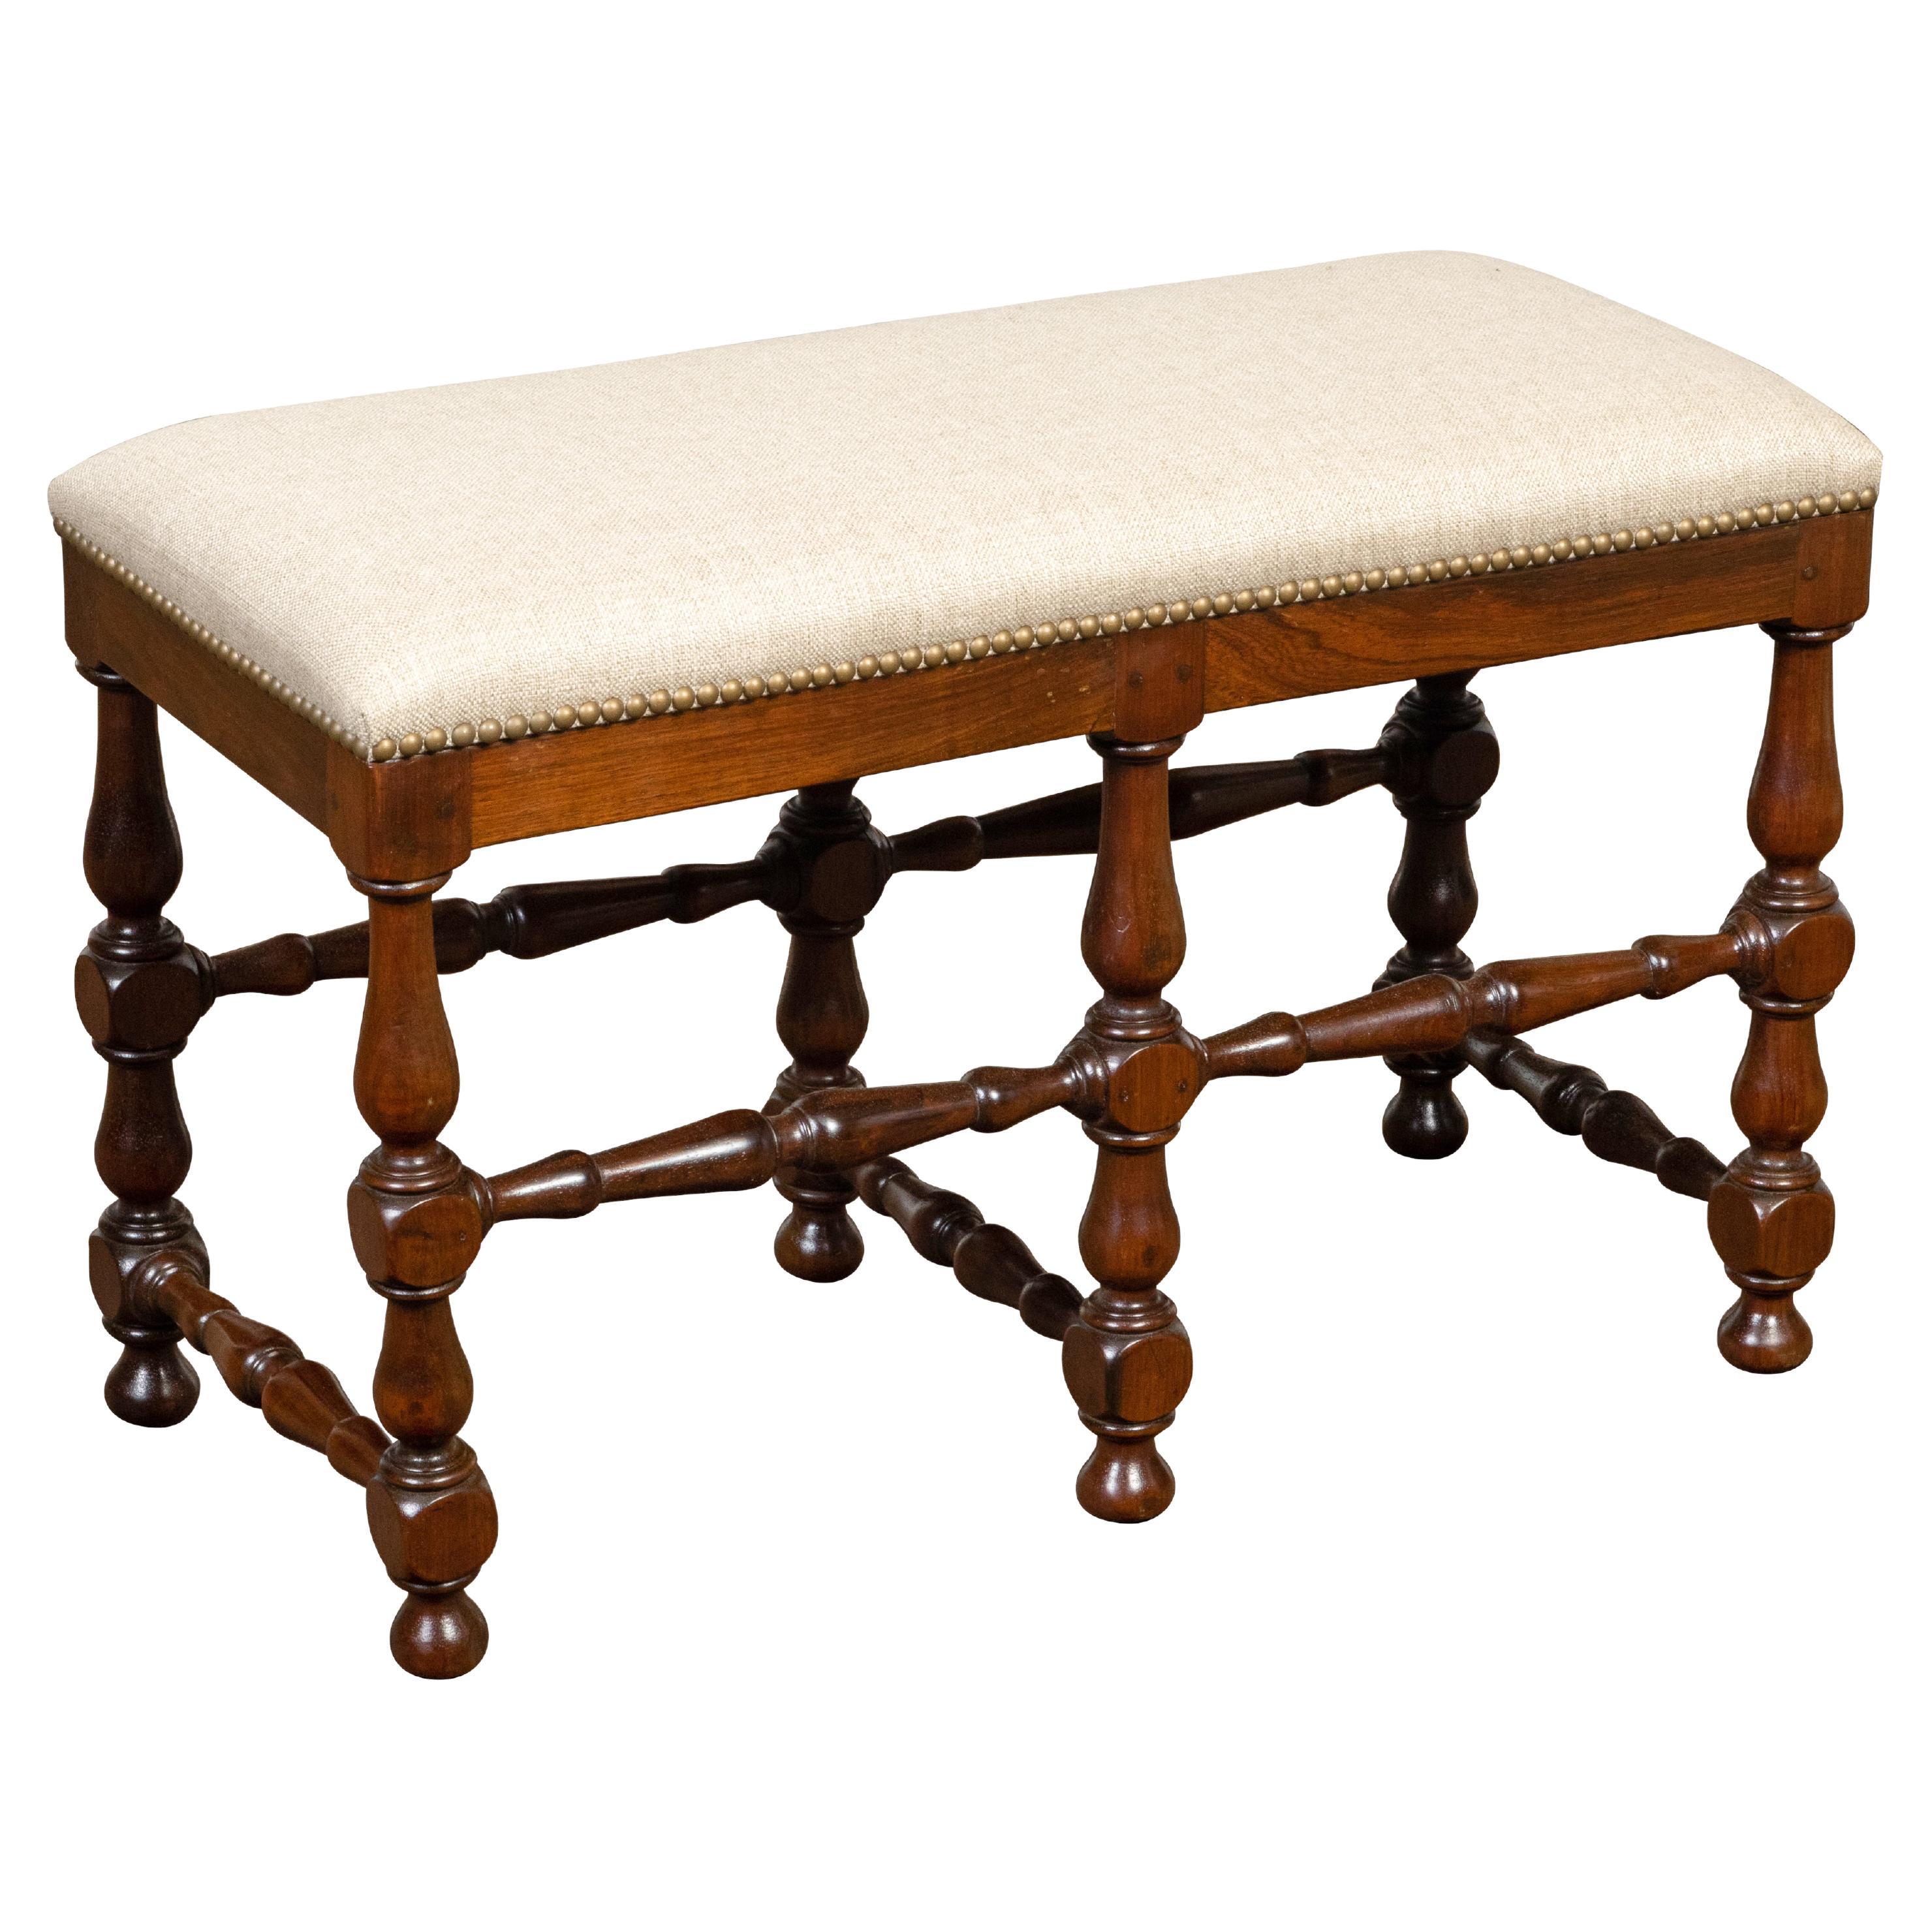 French 19th Century Walnut Bench with Turned Legs and Linen Upholstery